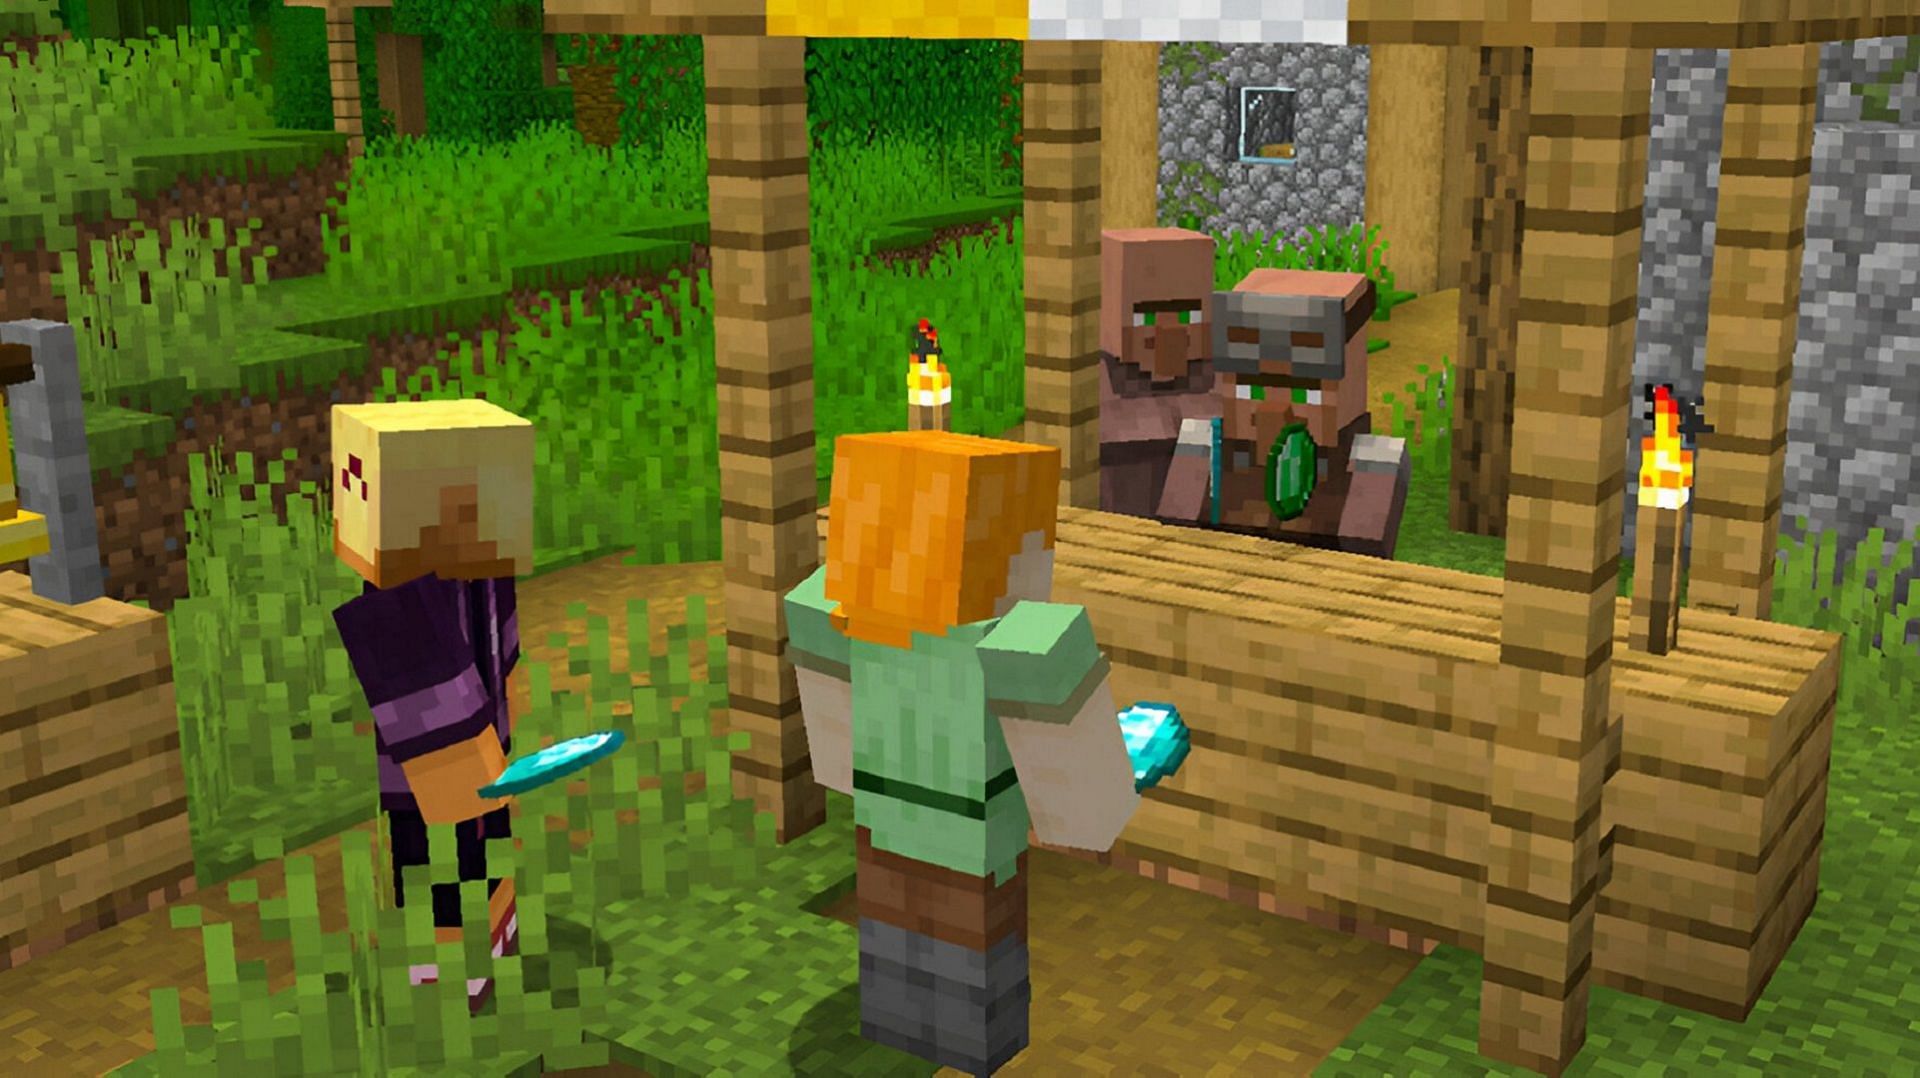 Minecraft fans will need a few diamonds for diamond armor trades in the latest snapshot (Image via Mojang)